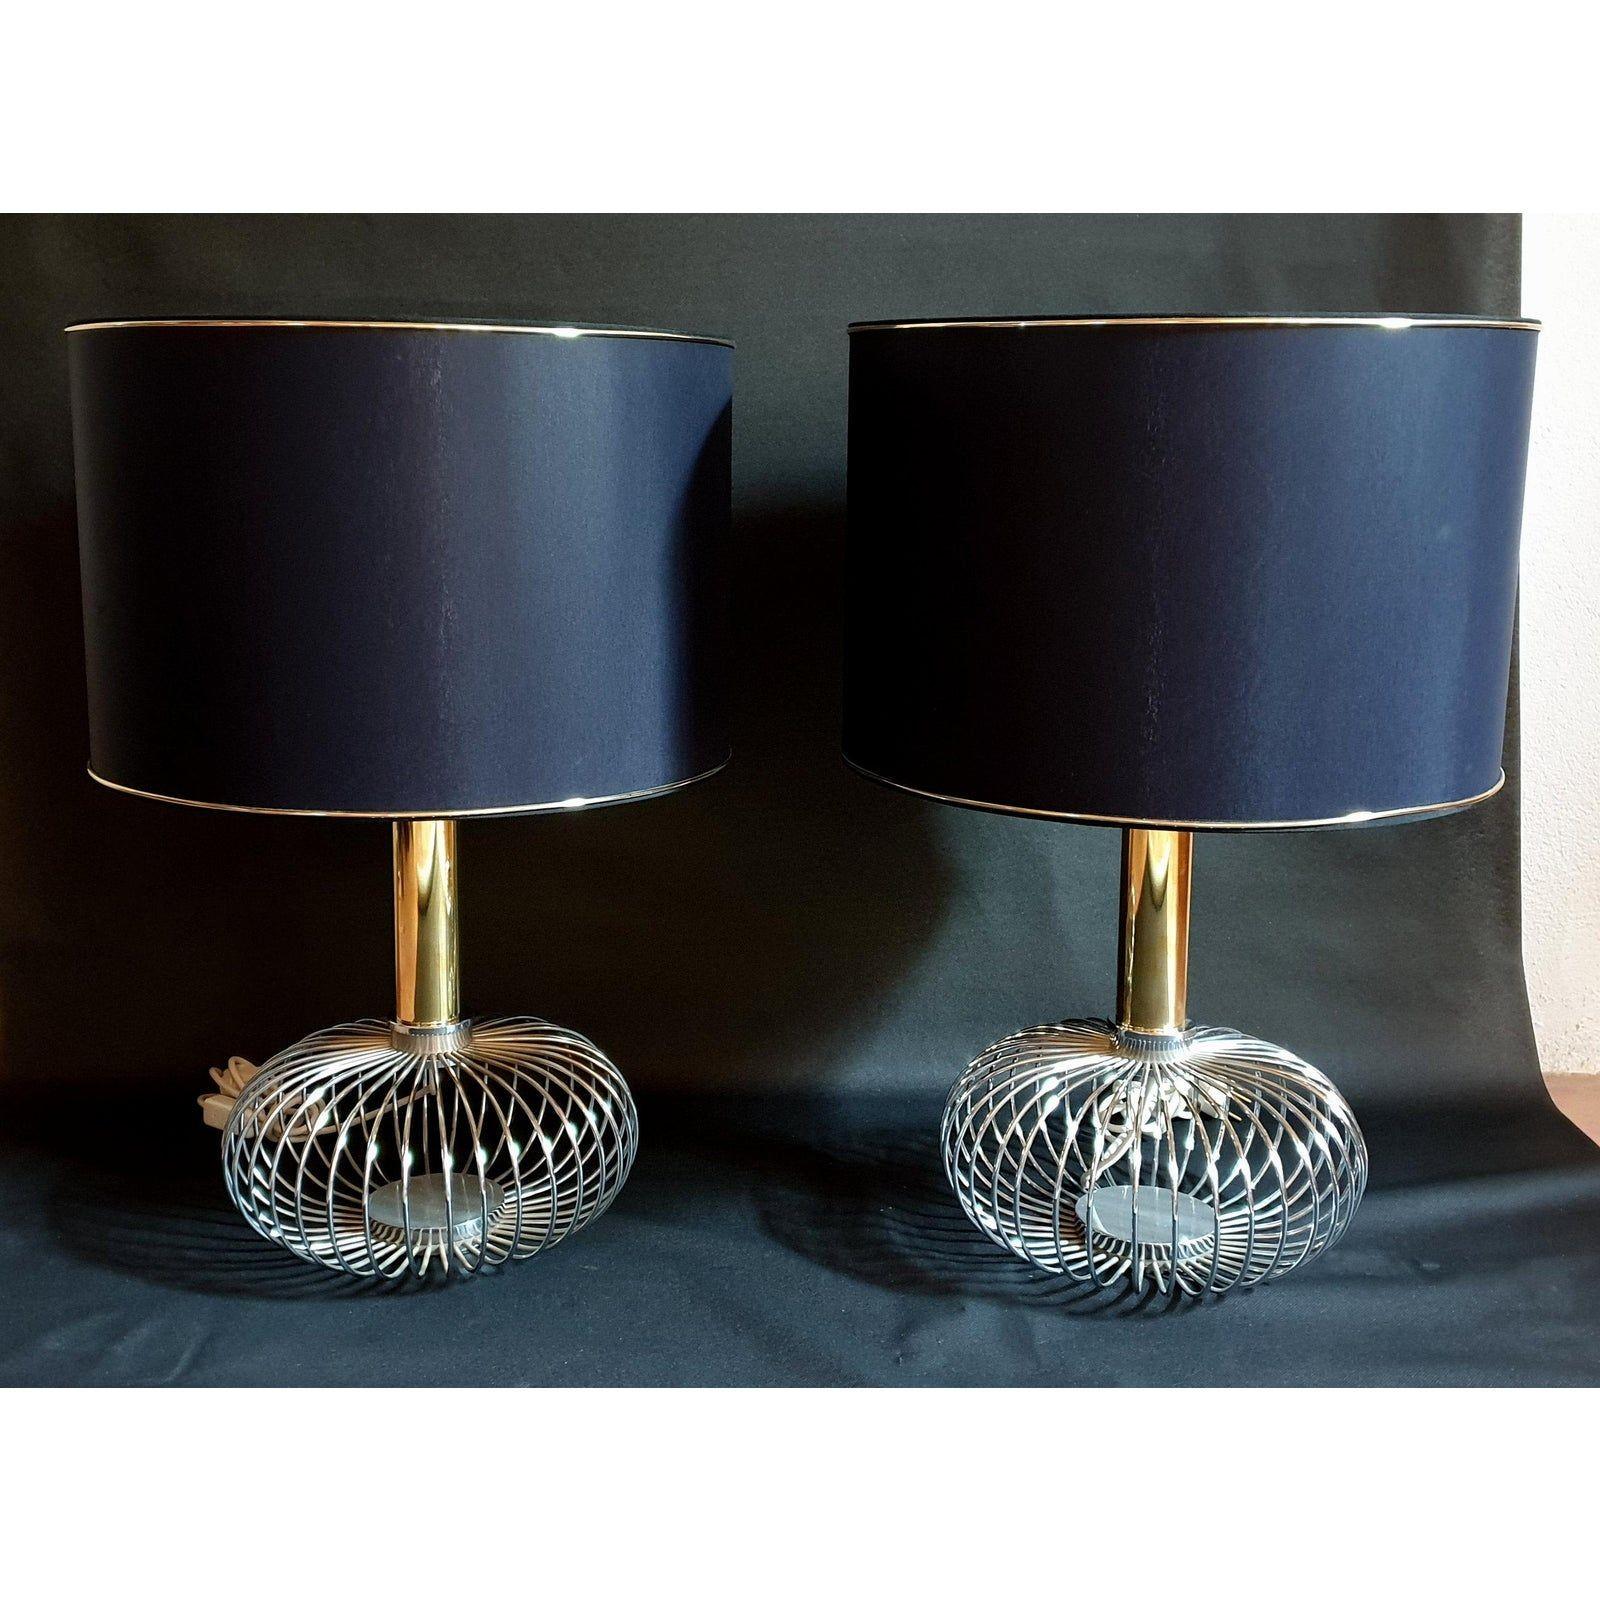 Pair of Mid-Century Modern table lamps, in chrome and brass, attributed to Sciolari, Italy 1970s.
The mid century table lamps have their original shades, in black fabric outside and gold metallic finish inside.
1 light each, rewired for the US.
The